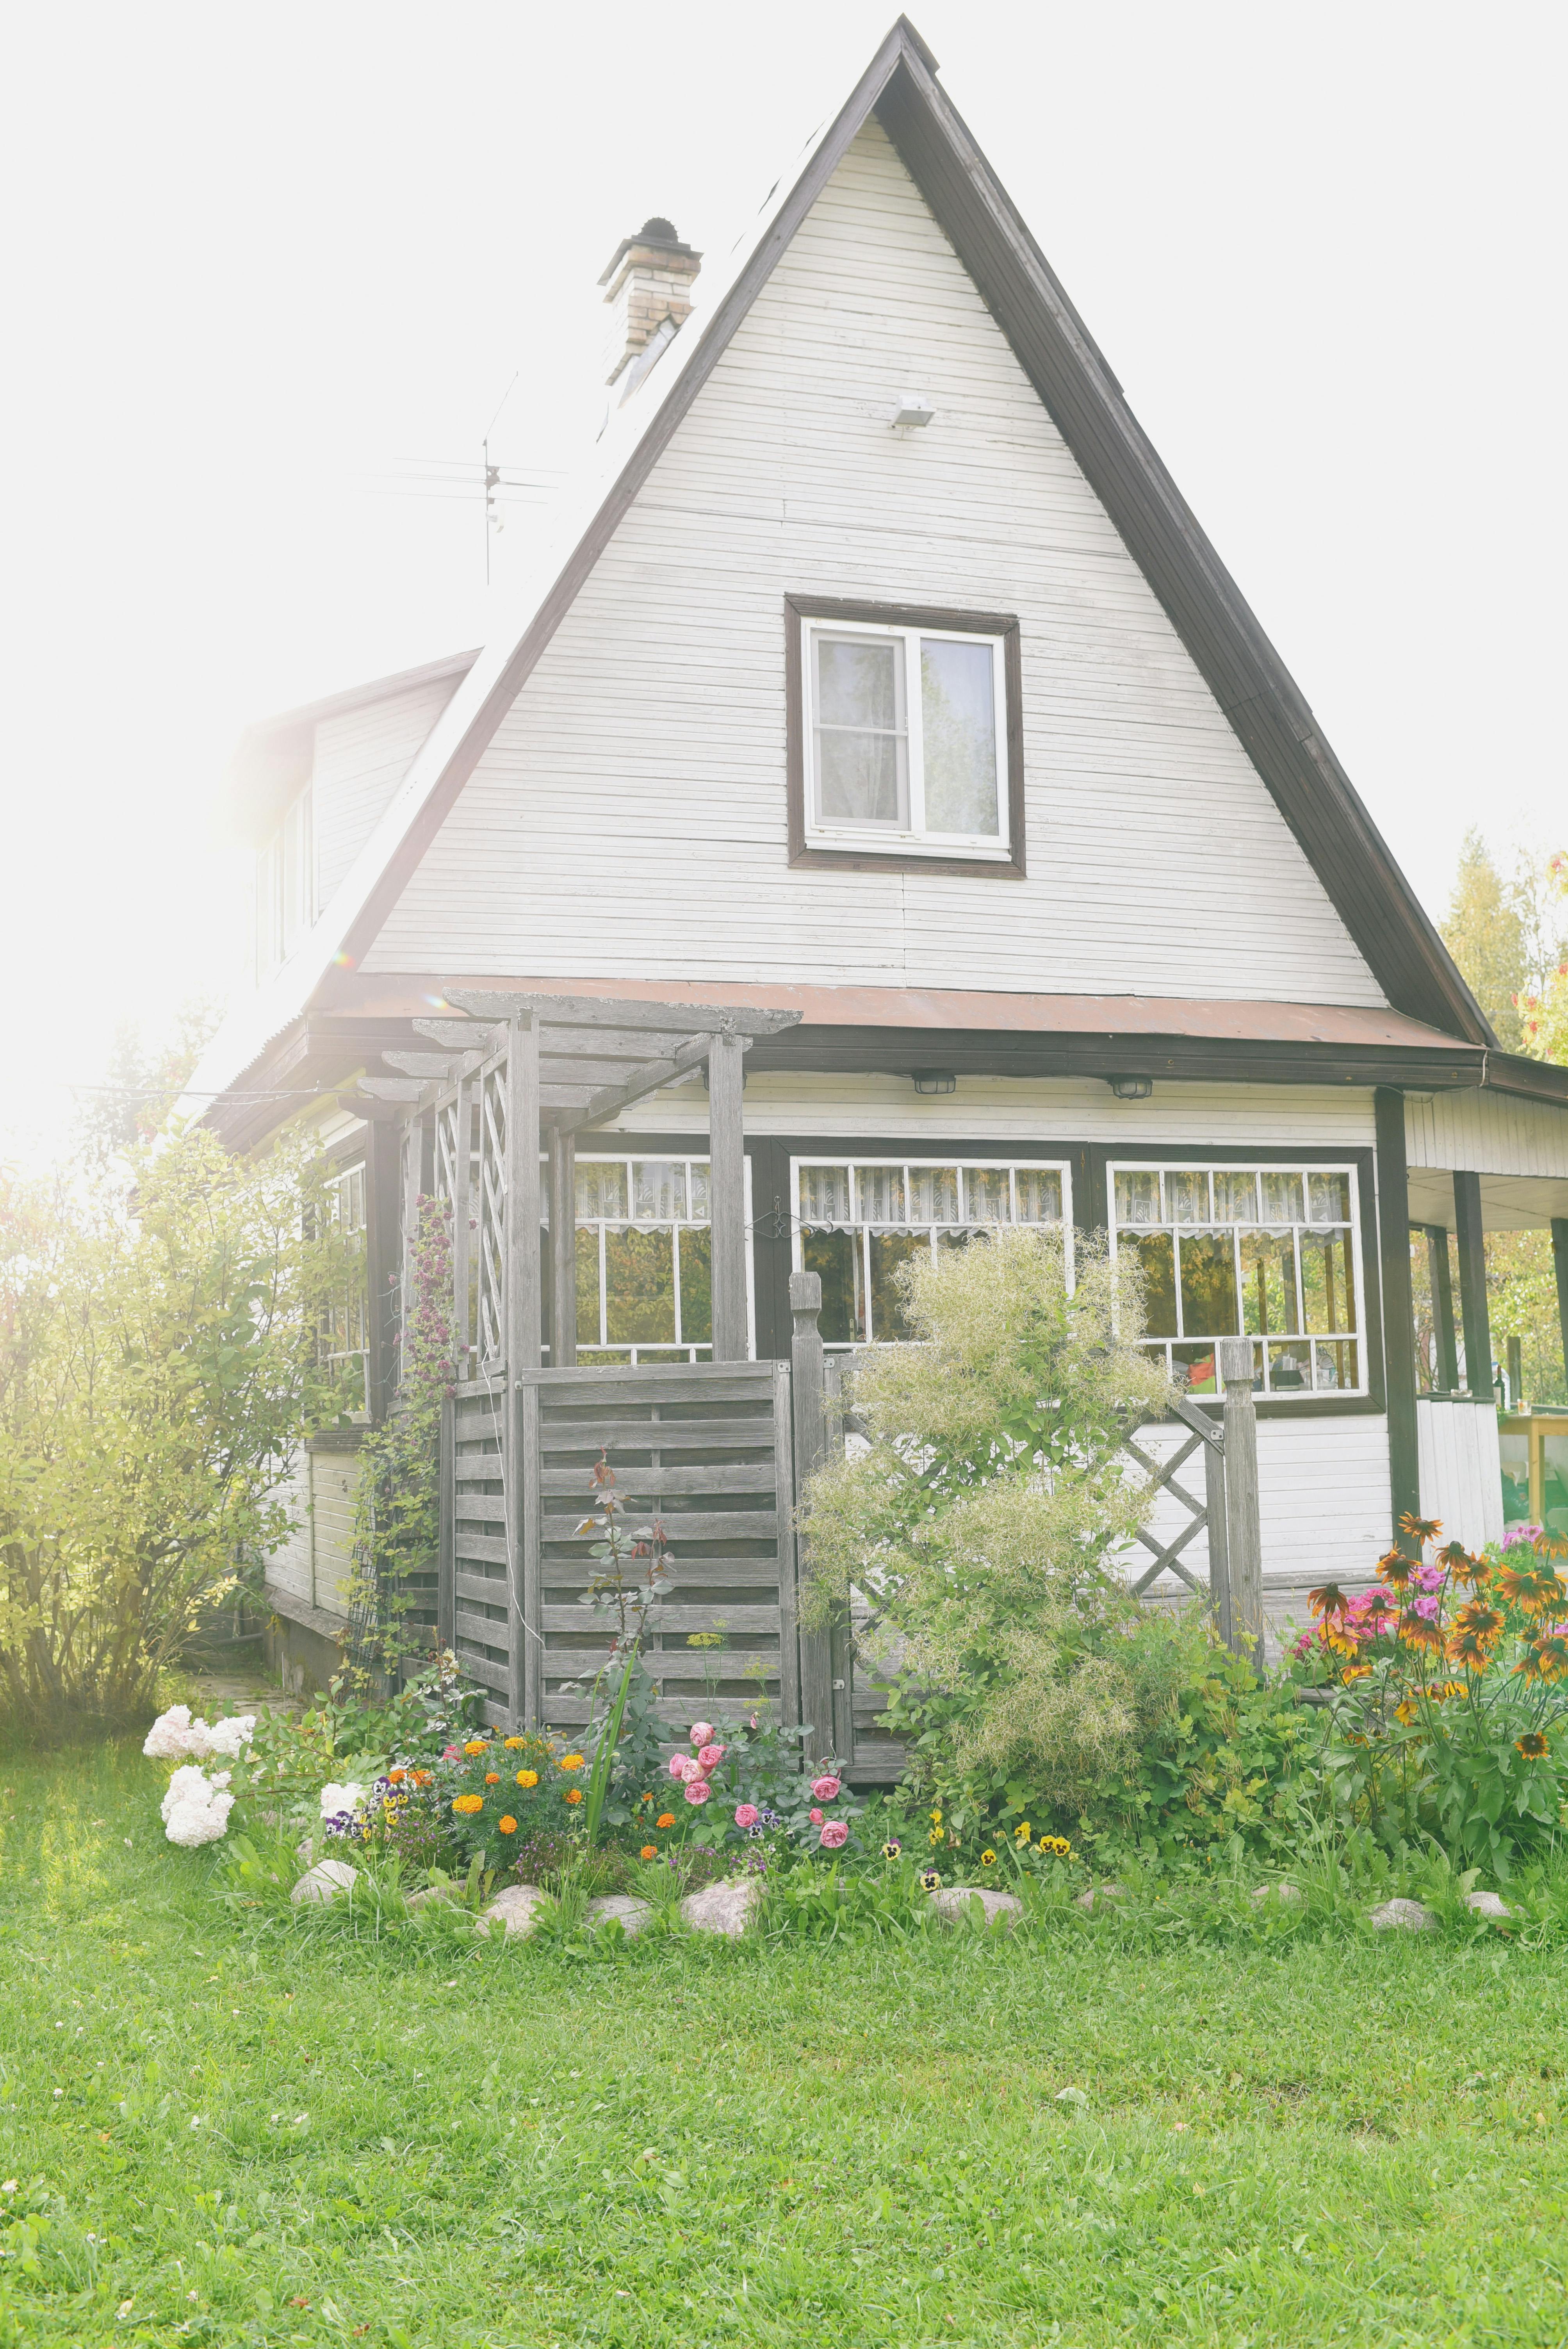 A small cottage | Source: Pexels